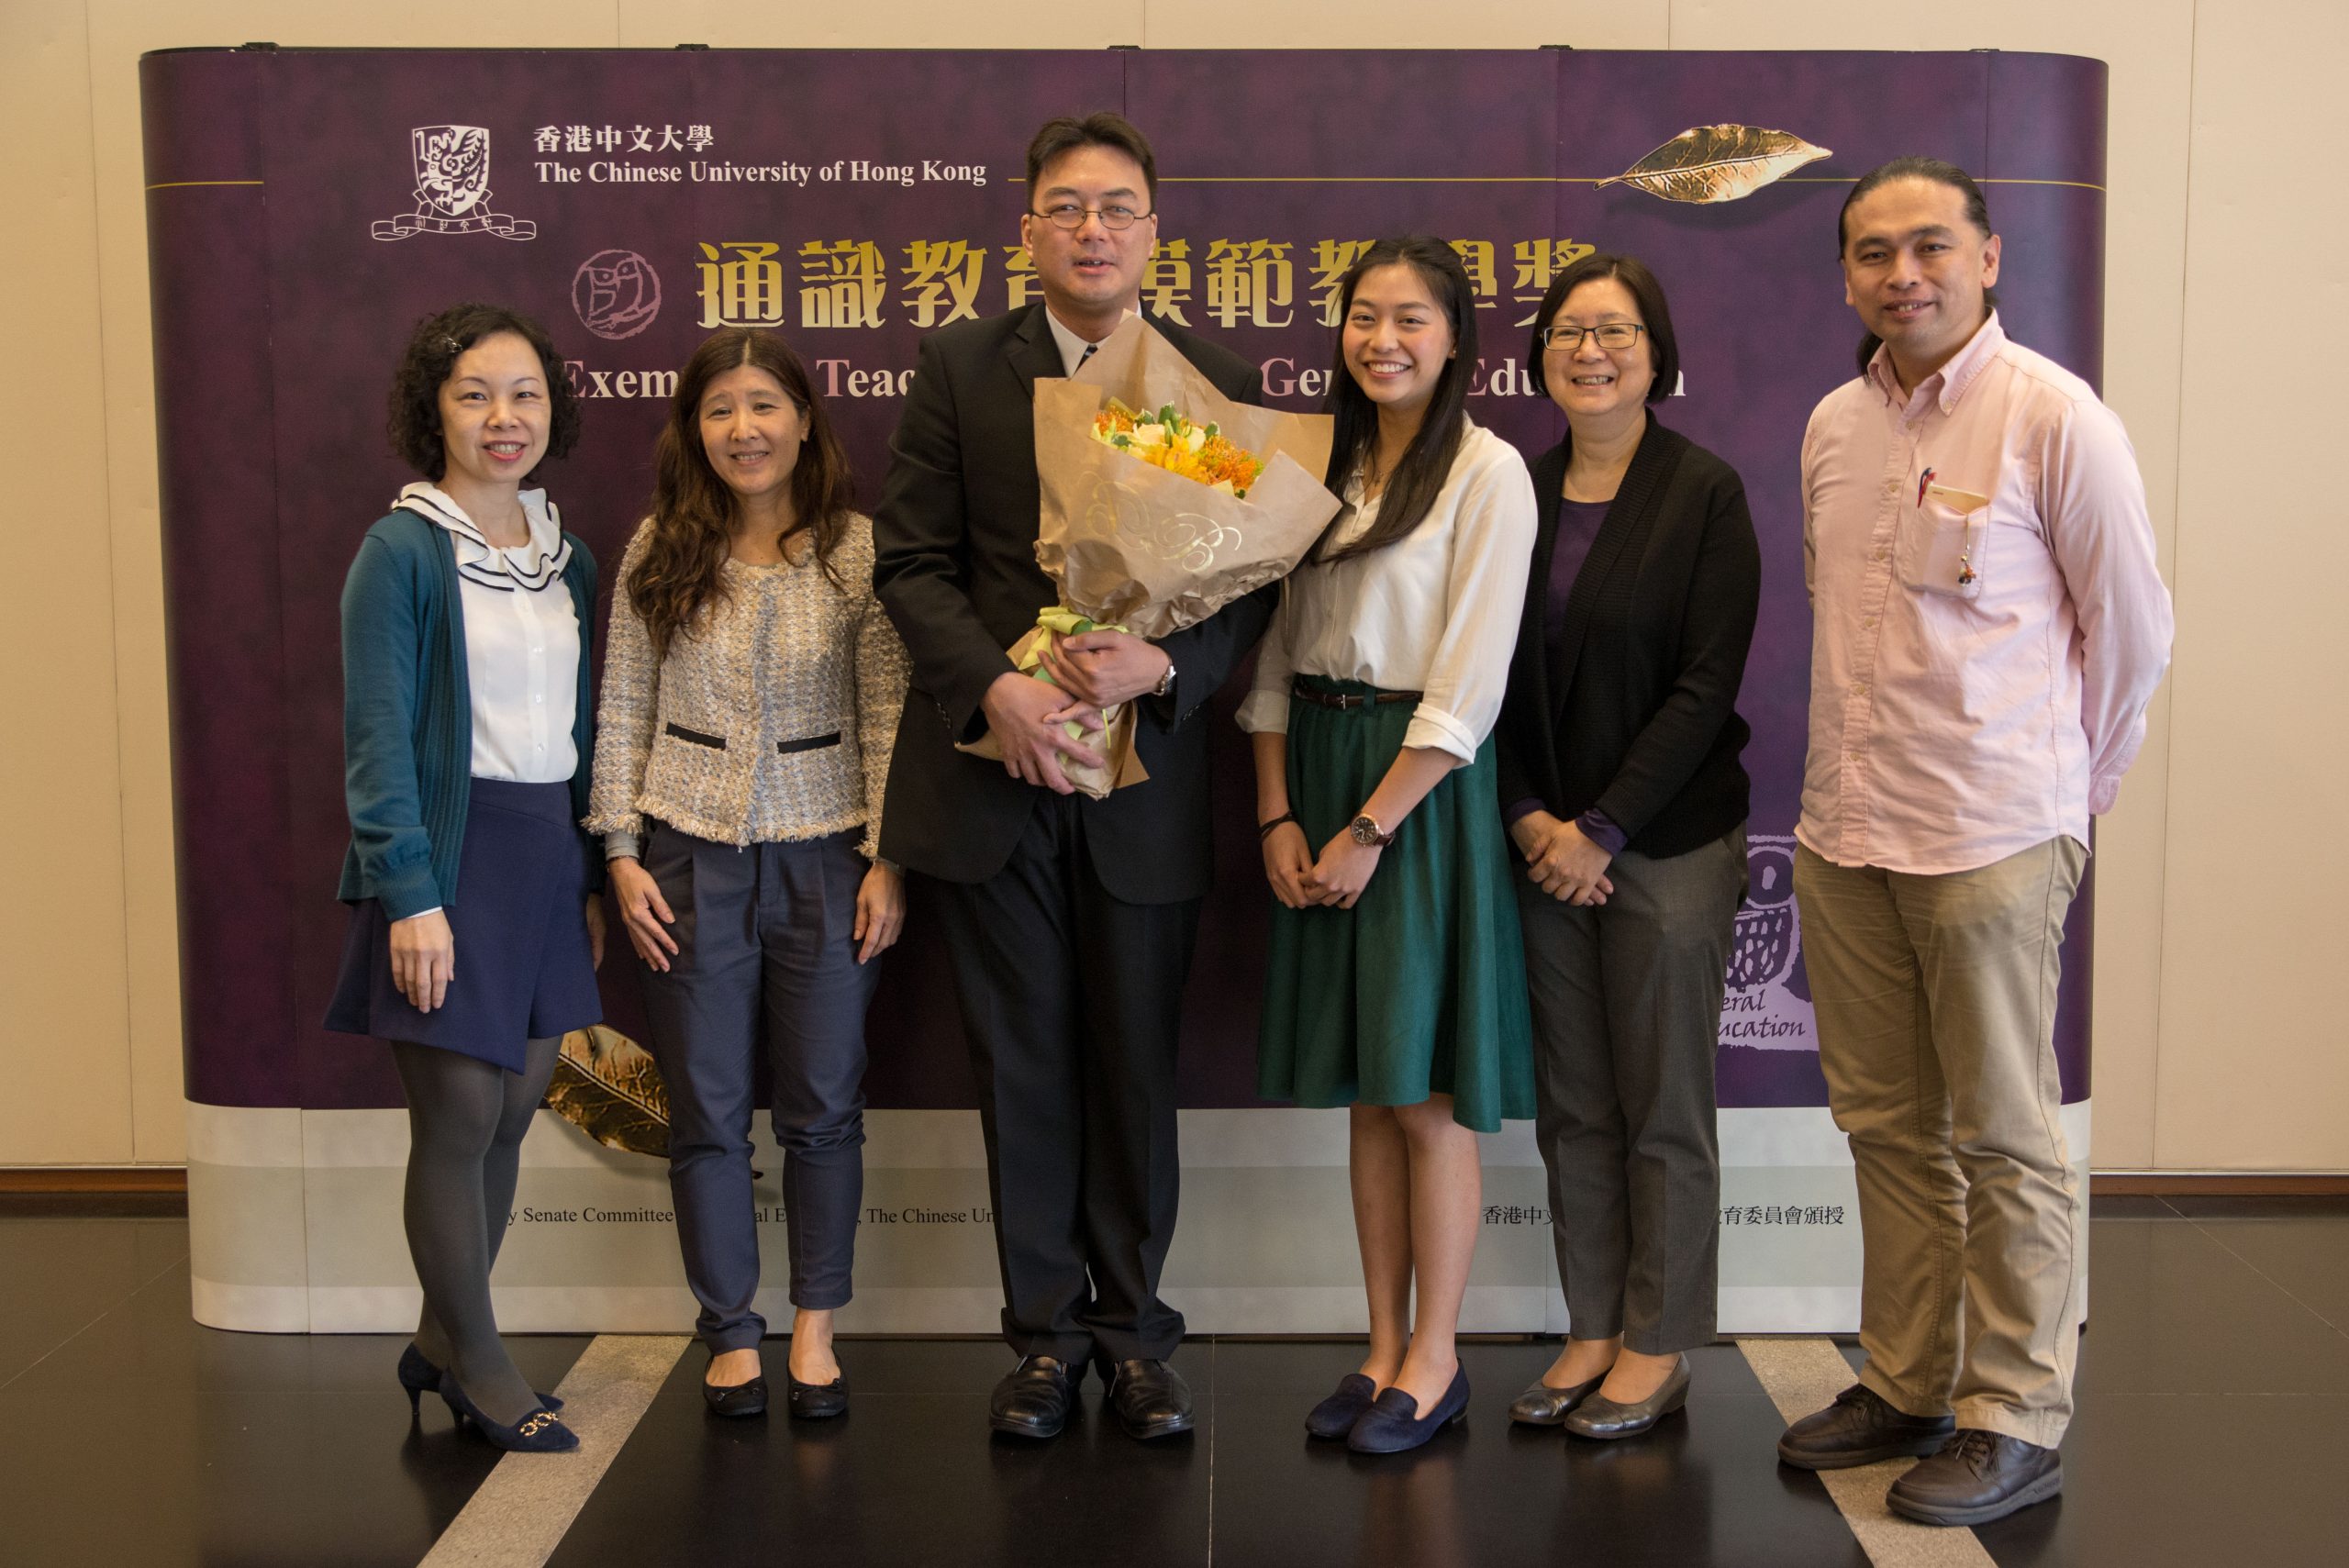 Professor Ho Chi Ming, his colleagues and students